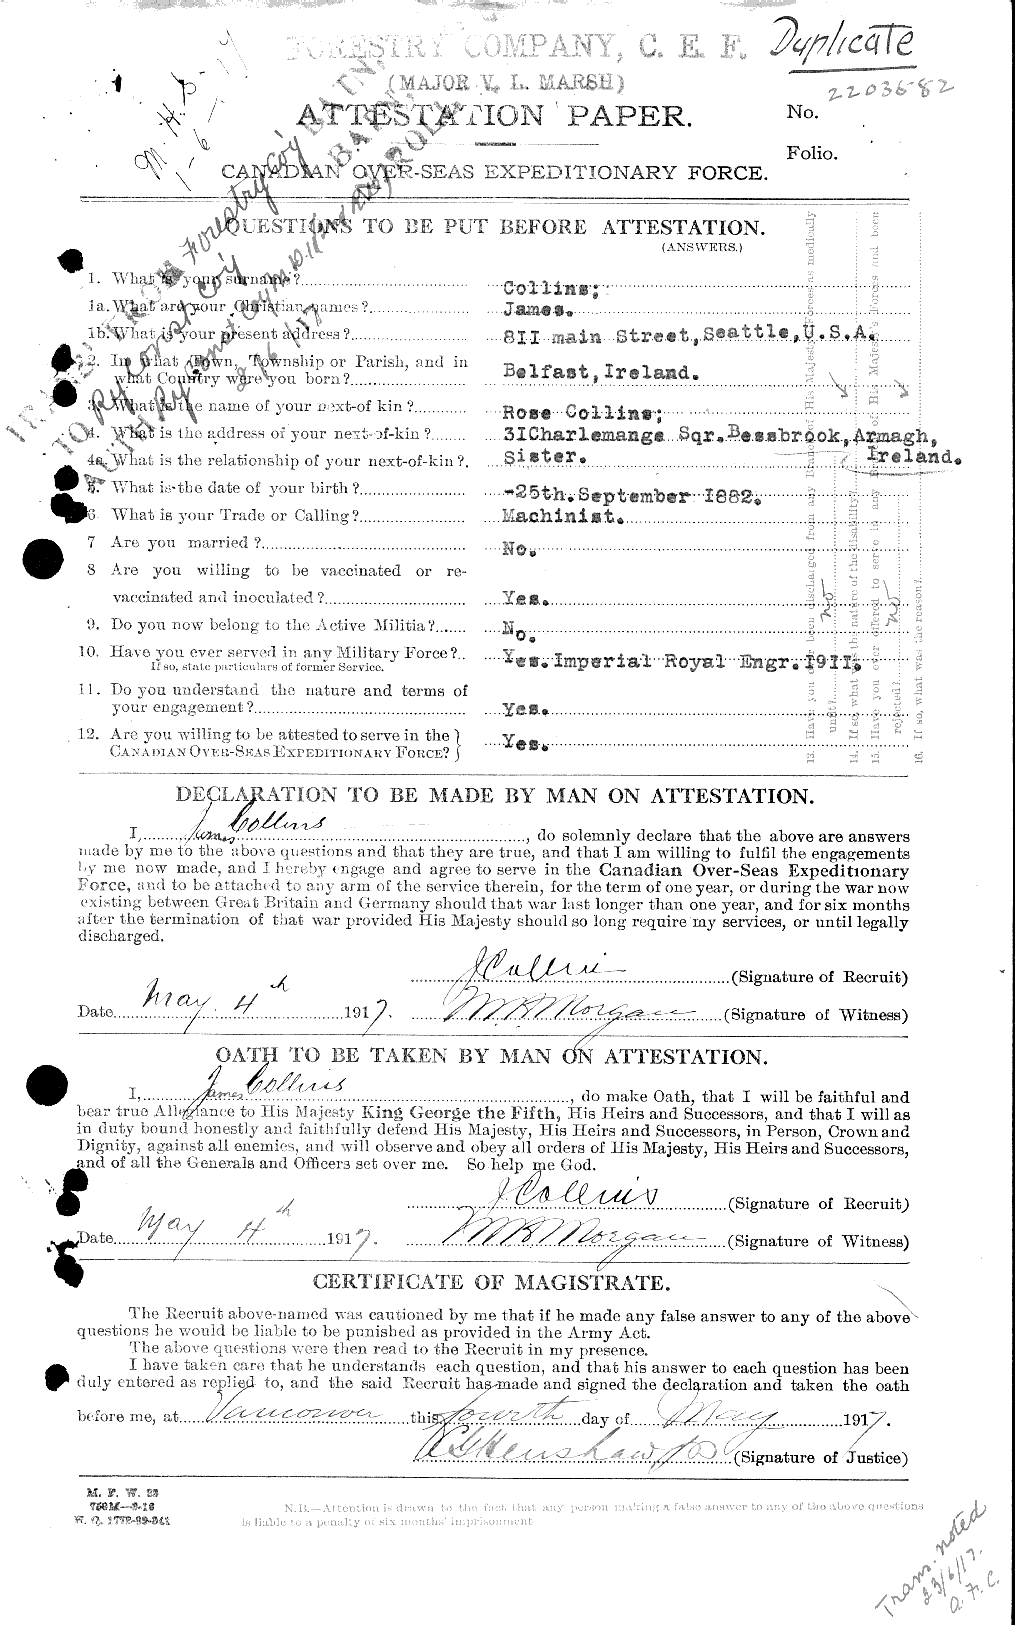 Personnel Records of the First World War - CEF 037919a